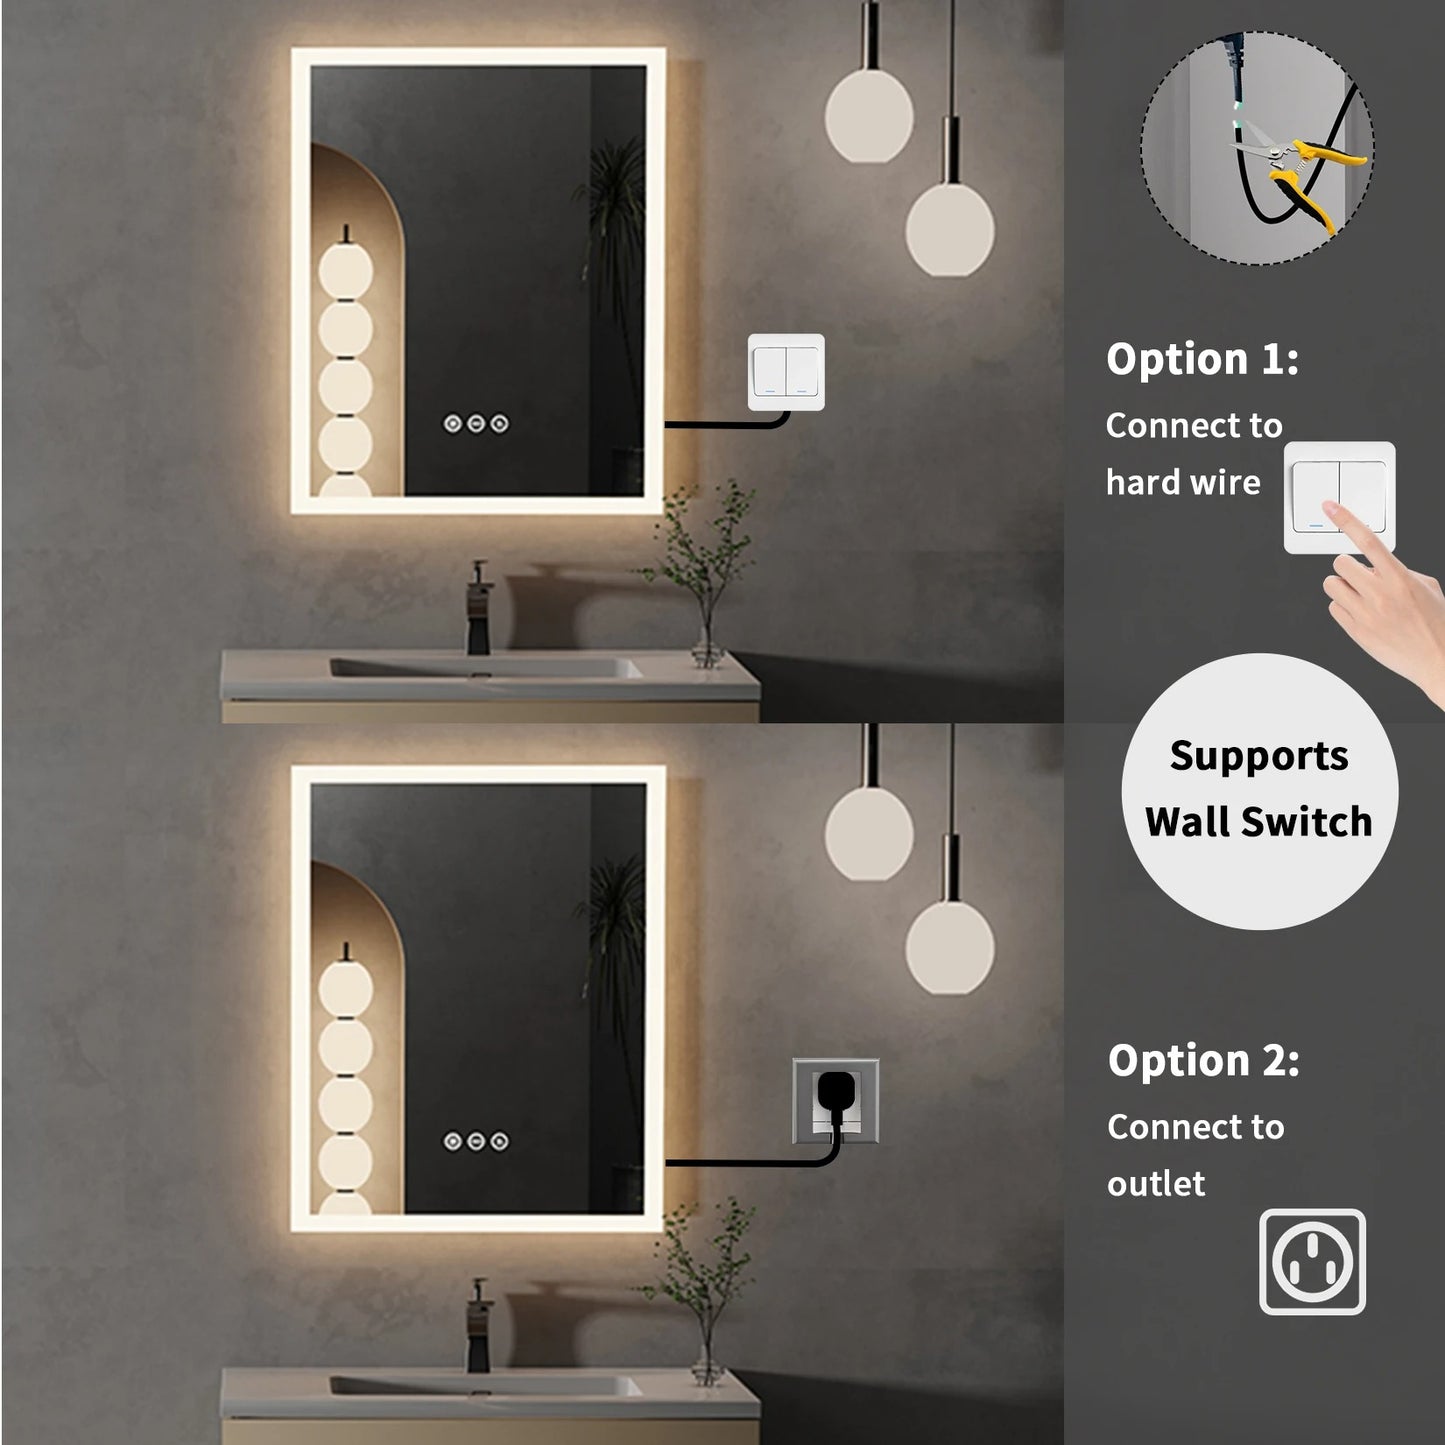 16x20 inch LED Lighted Bathroom Mirror with Anti-Fog, Wall Mounted Vanity Mirror with Smart Touch Button, Memory Function